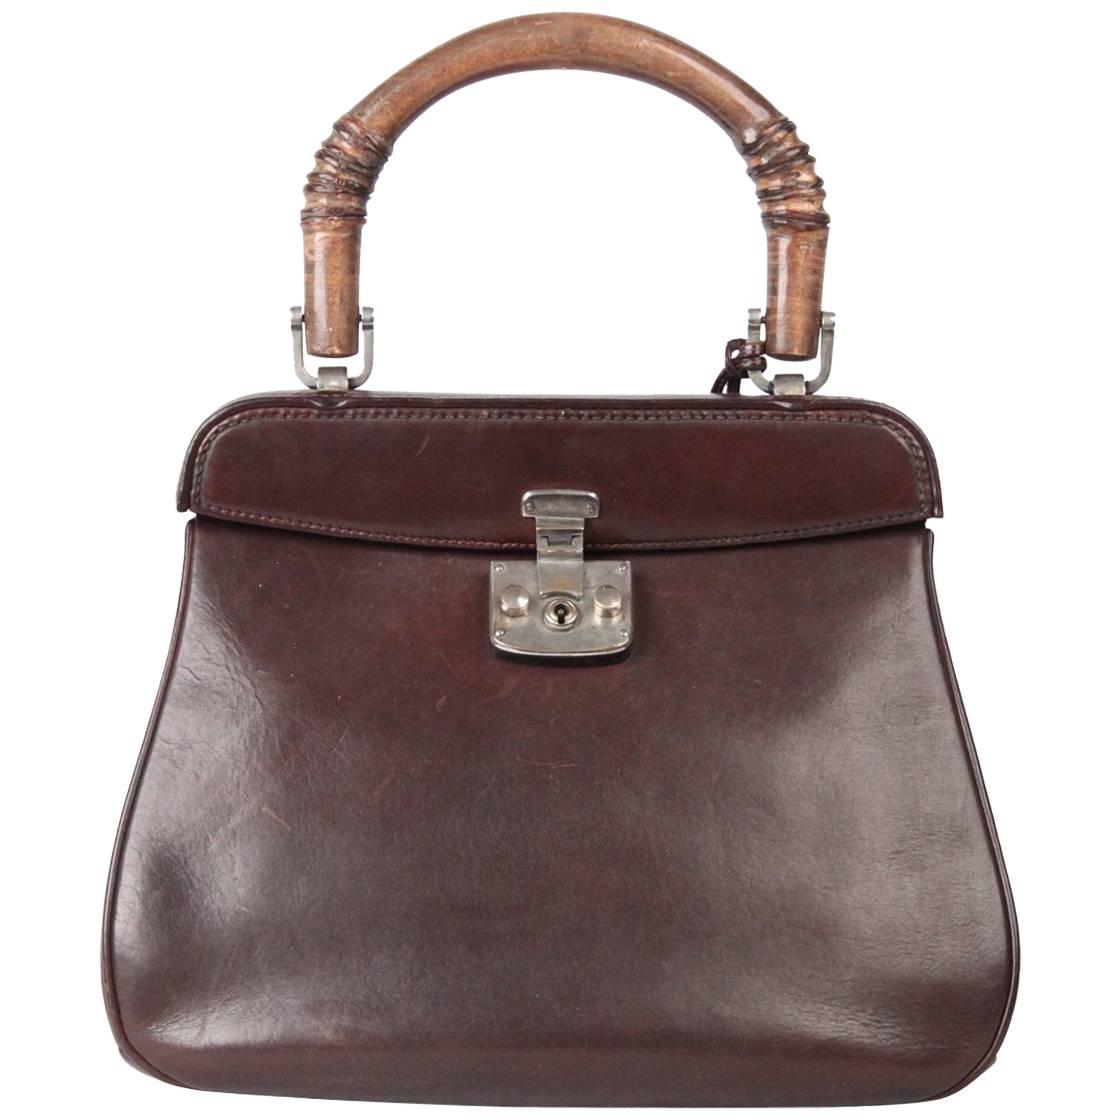 GUCCI Rare VINTAGE 50s Brown Leather LADY LOCK BAG Original Issue